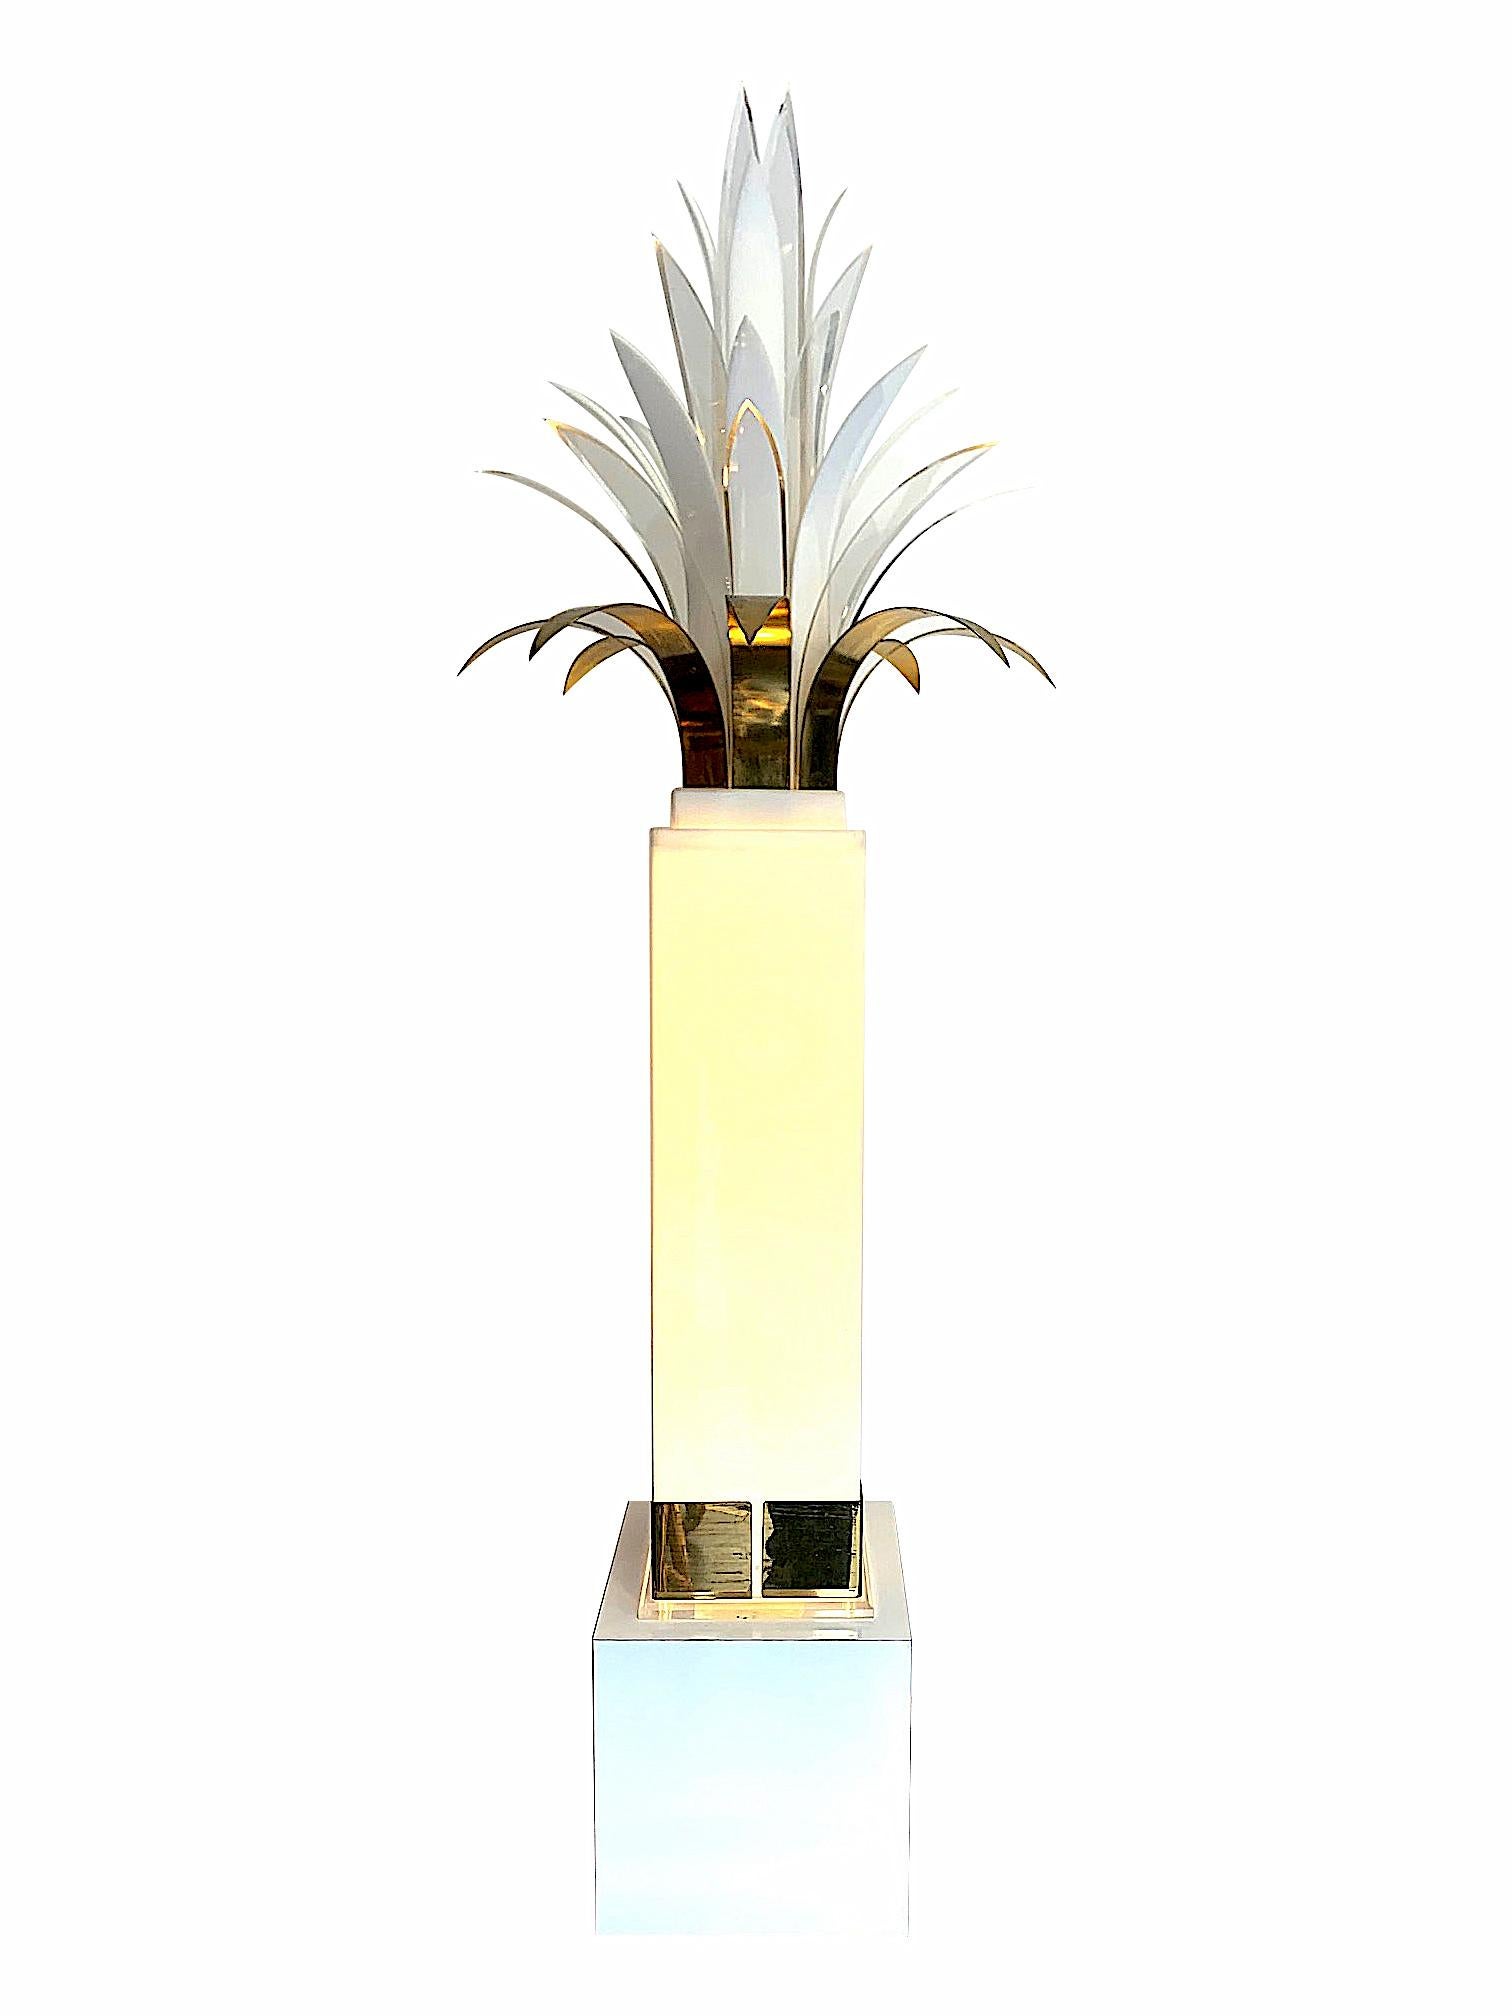 Late 20th Century Rare Stunning 1970s Palm Tree Floor Lamp by Peter Doff for Berger Designs